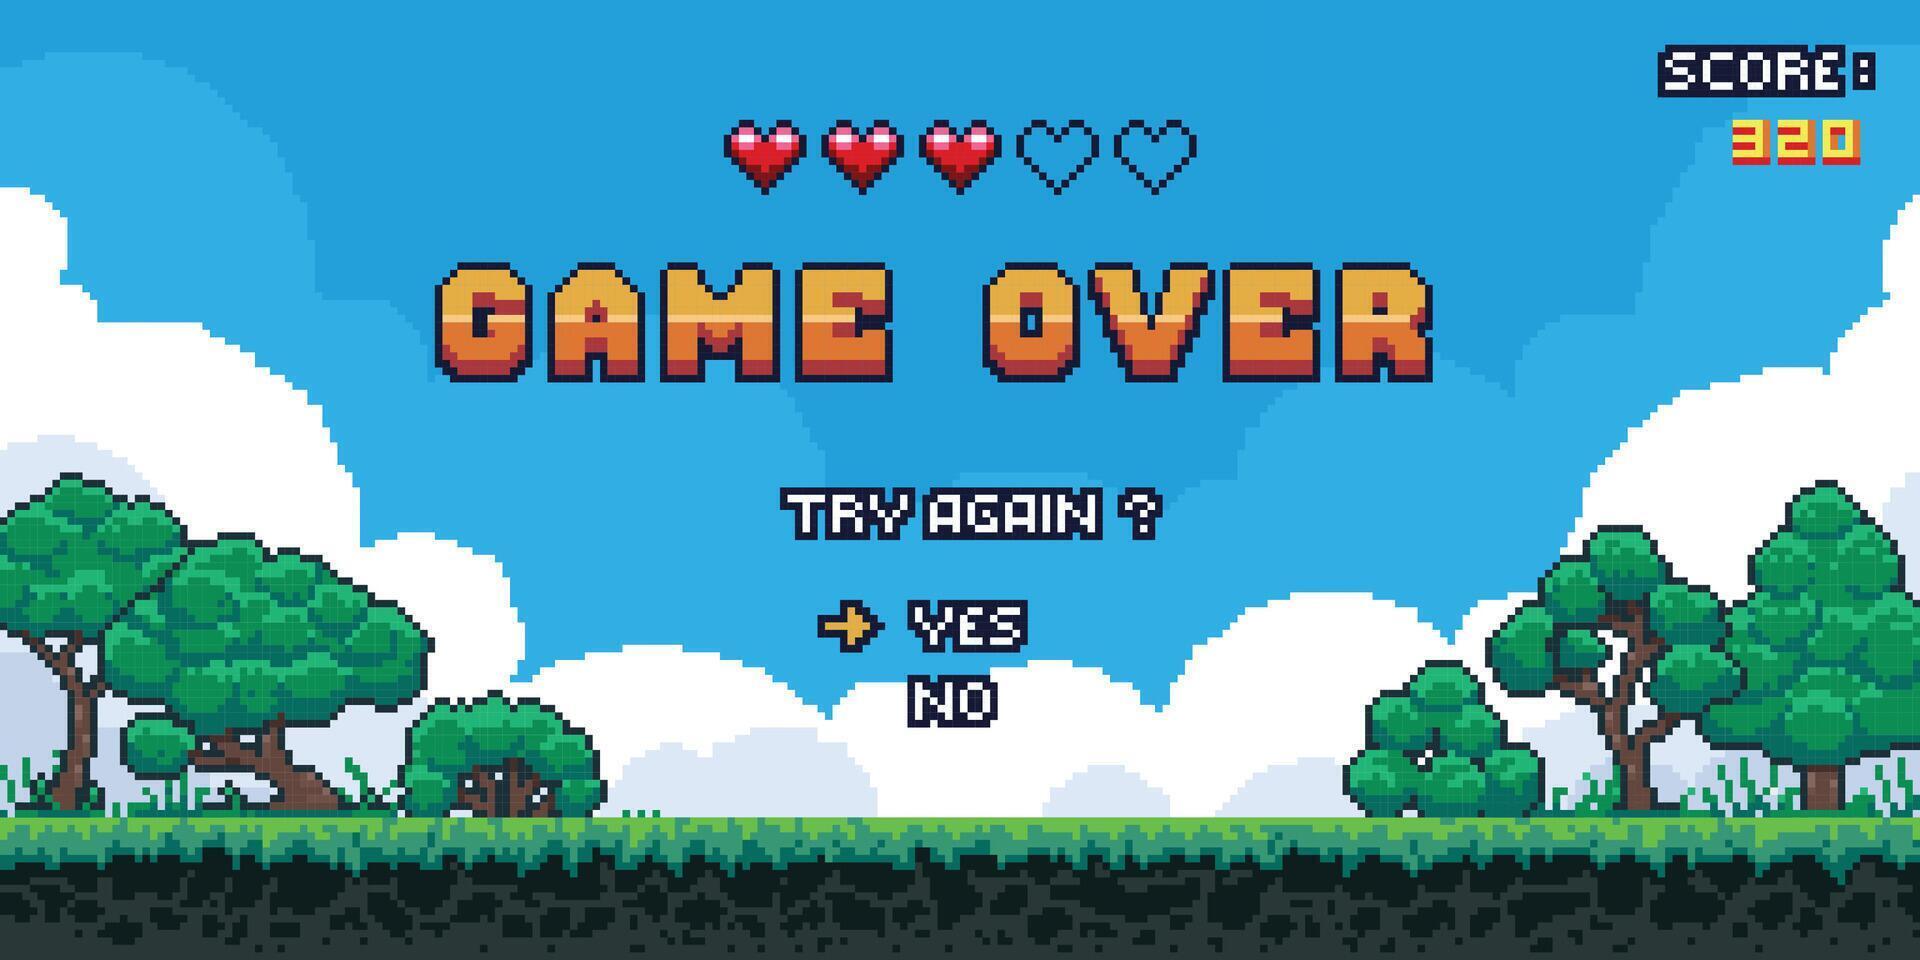 Game over background. Retro pixel 8 bit video game screen with score information, arcade landscape. Vector old classic game screen concept